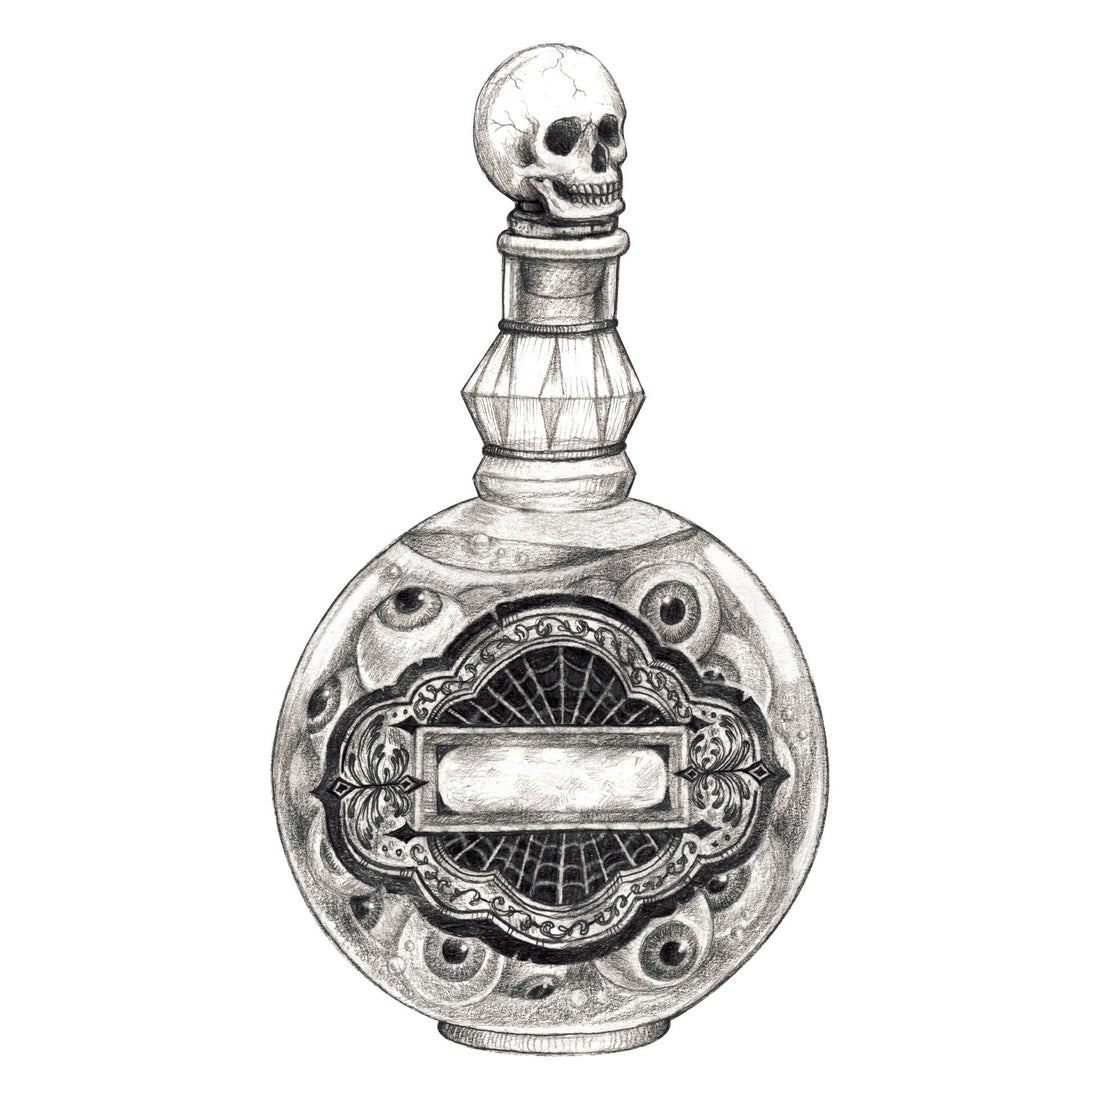 A die-cut black and white illustration of a spooky, ornate glass bottle full of eyeballs and liquid with a skull-shaped plug on top, and a blank label for personalization.